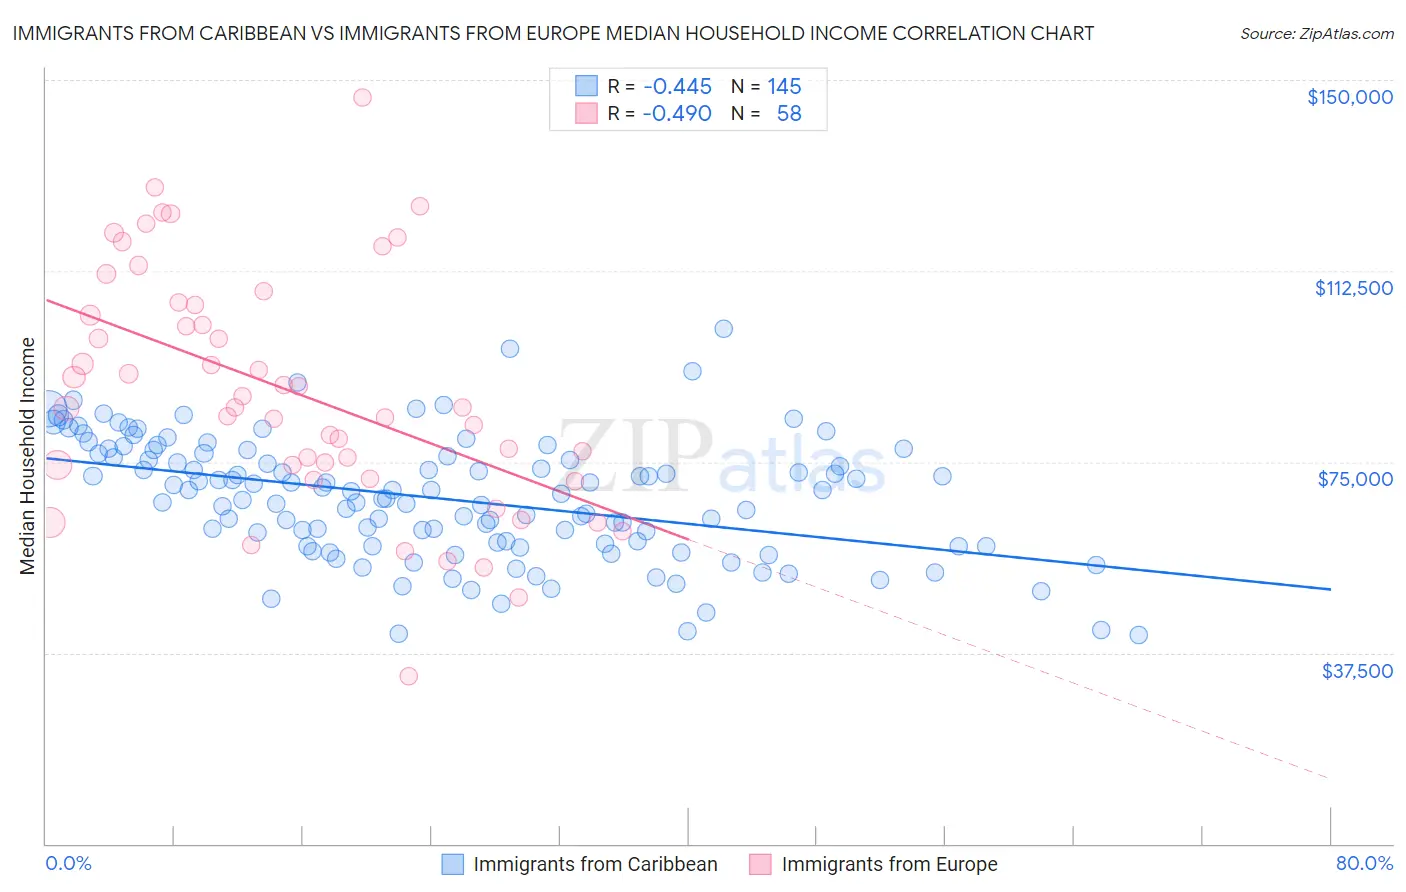 Immigrants from Caribbean vs Immigrants from Europe Median Household Income